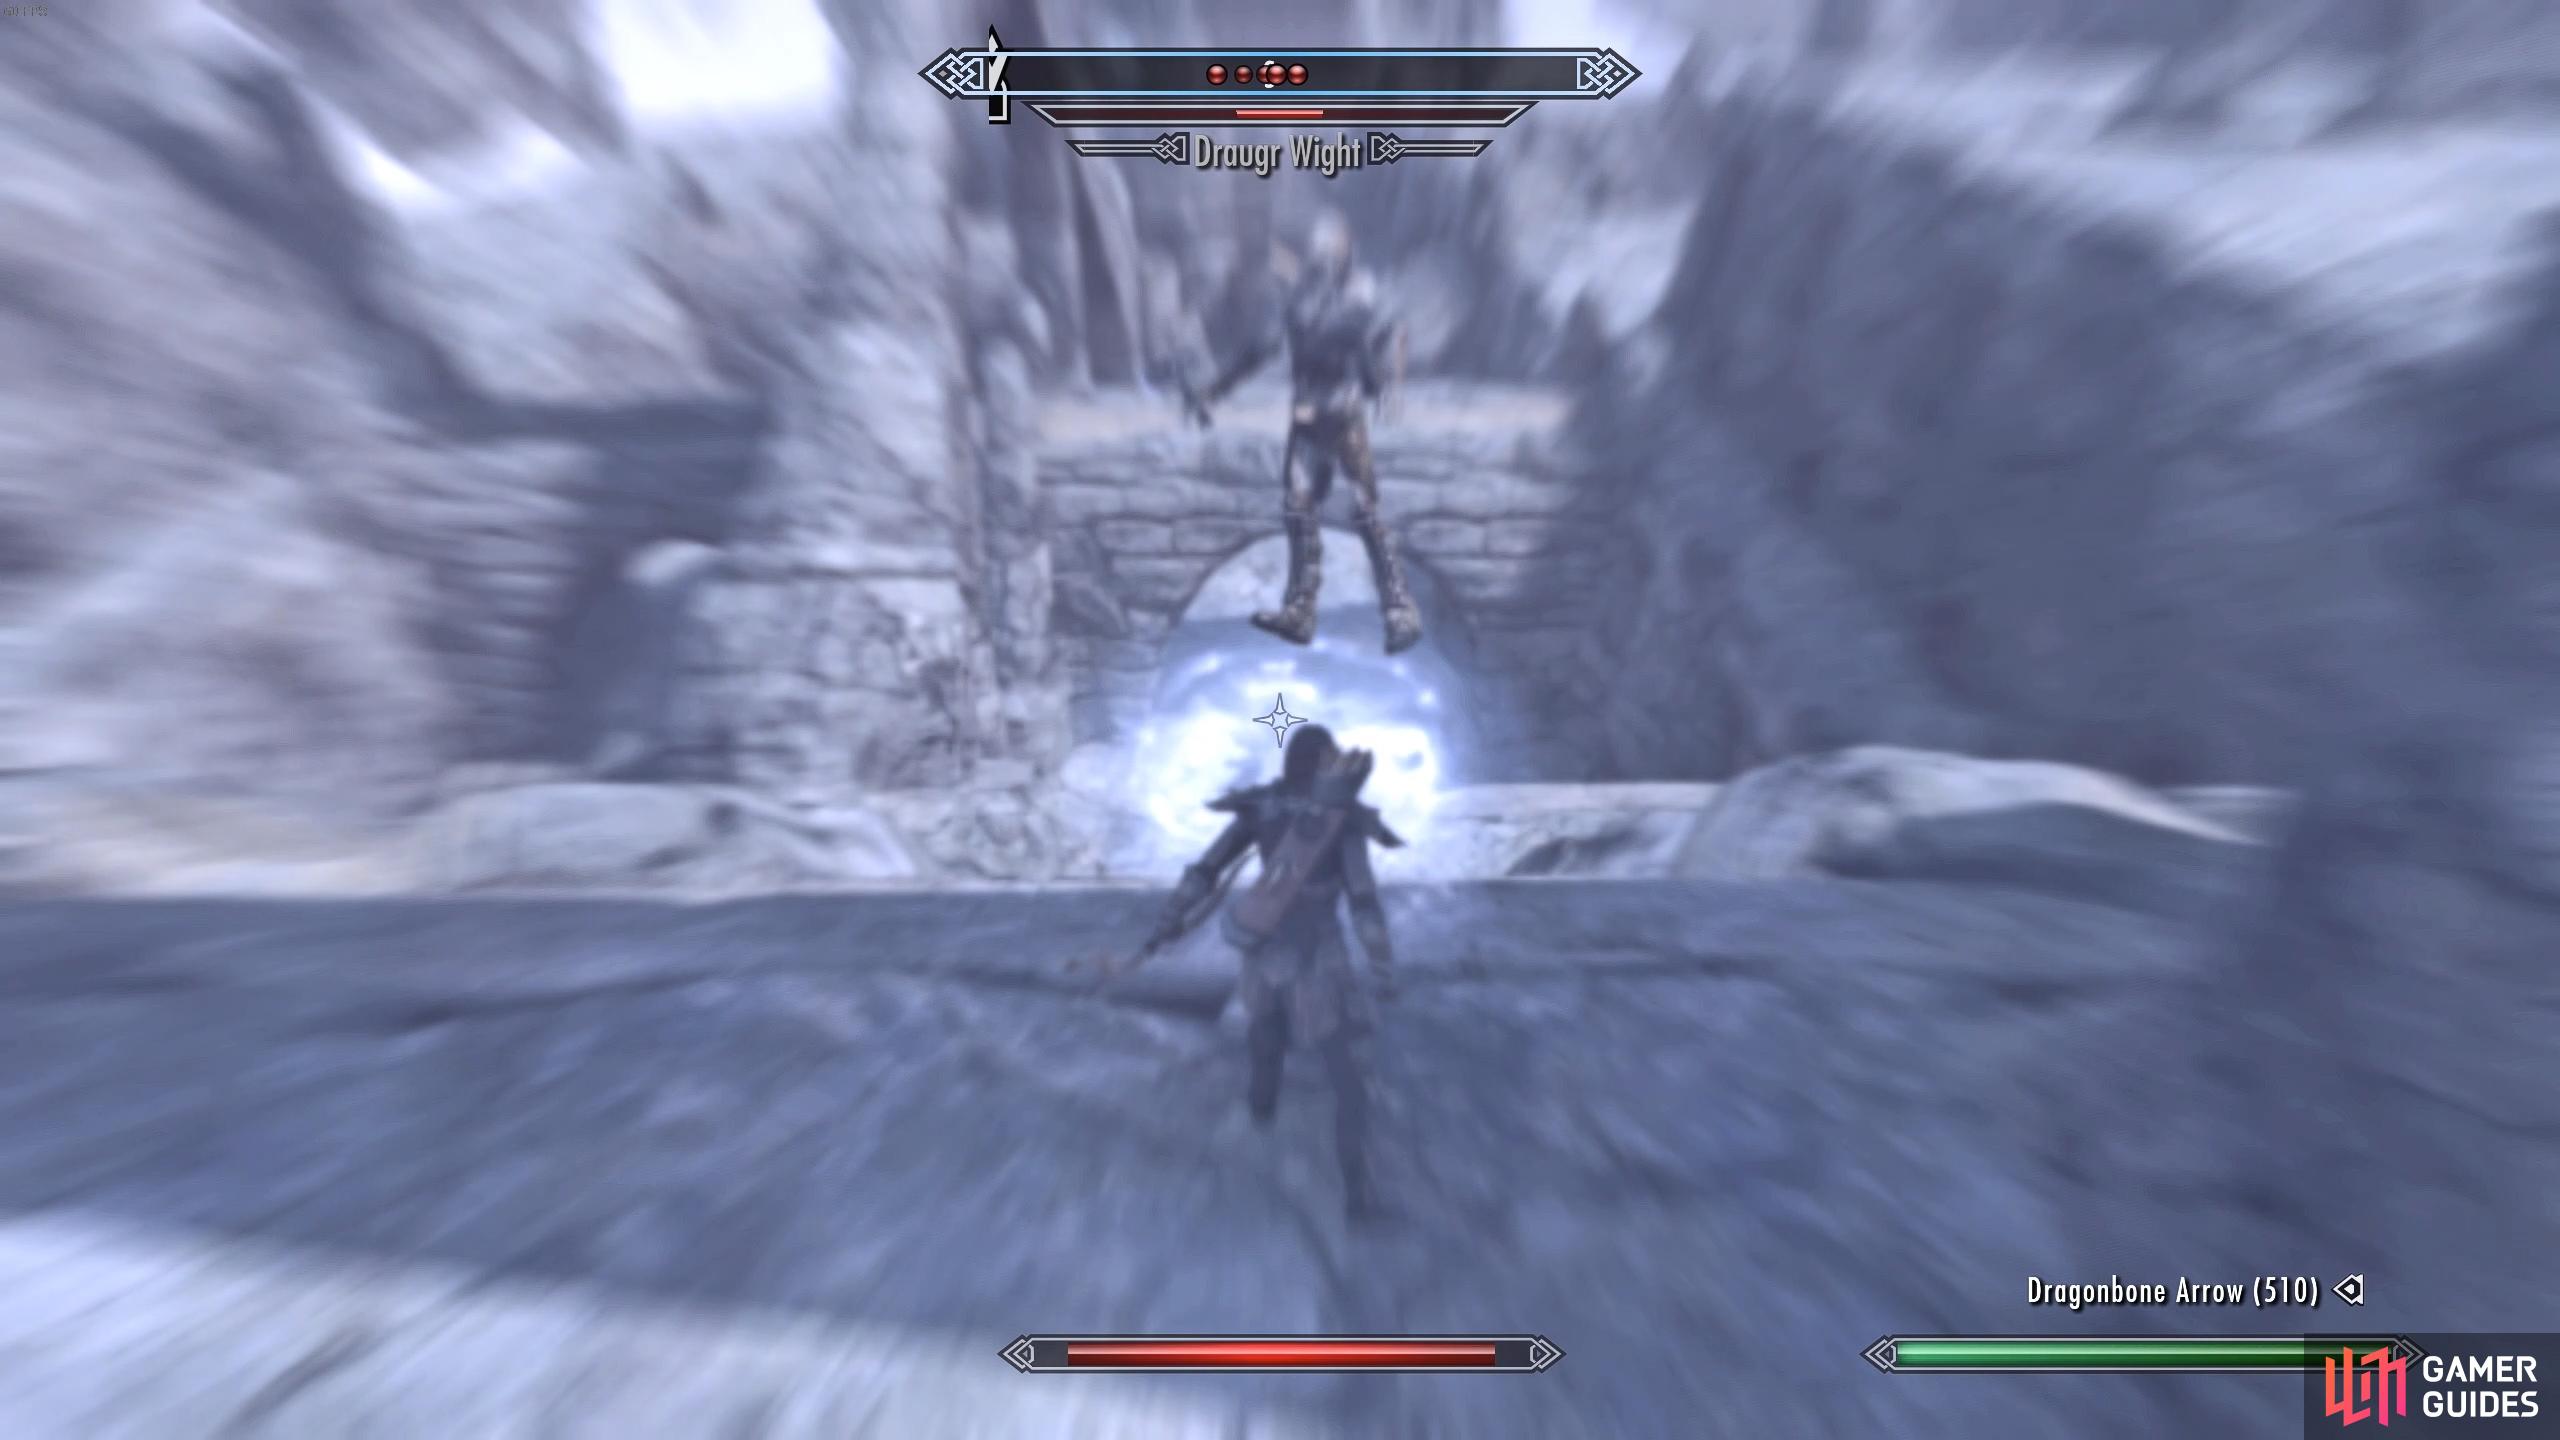 Use your surroundings to your advantage. Unrelenting Force a draugr off a high drop to cause extra damage.